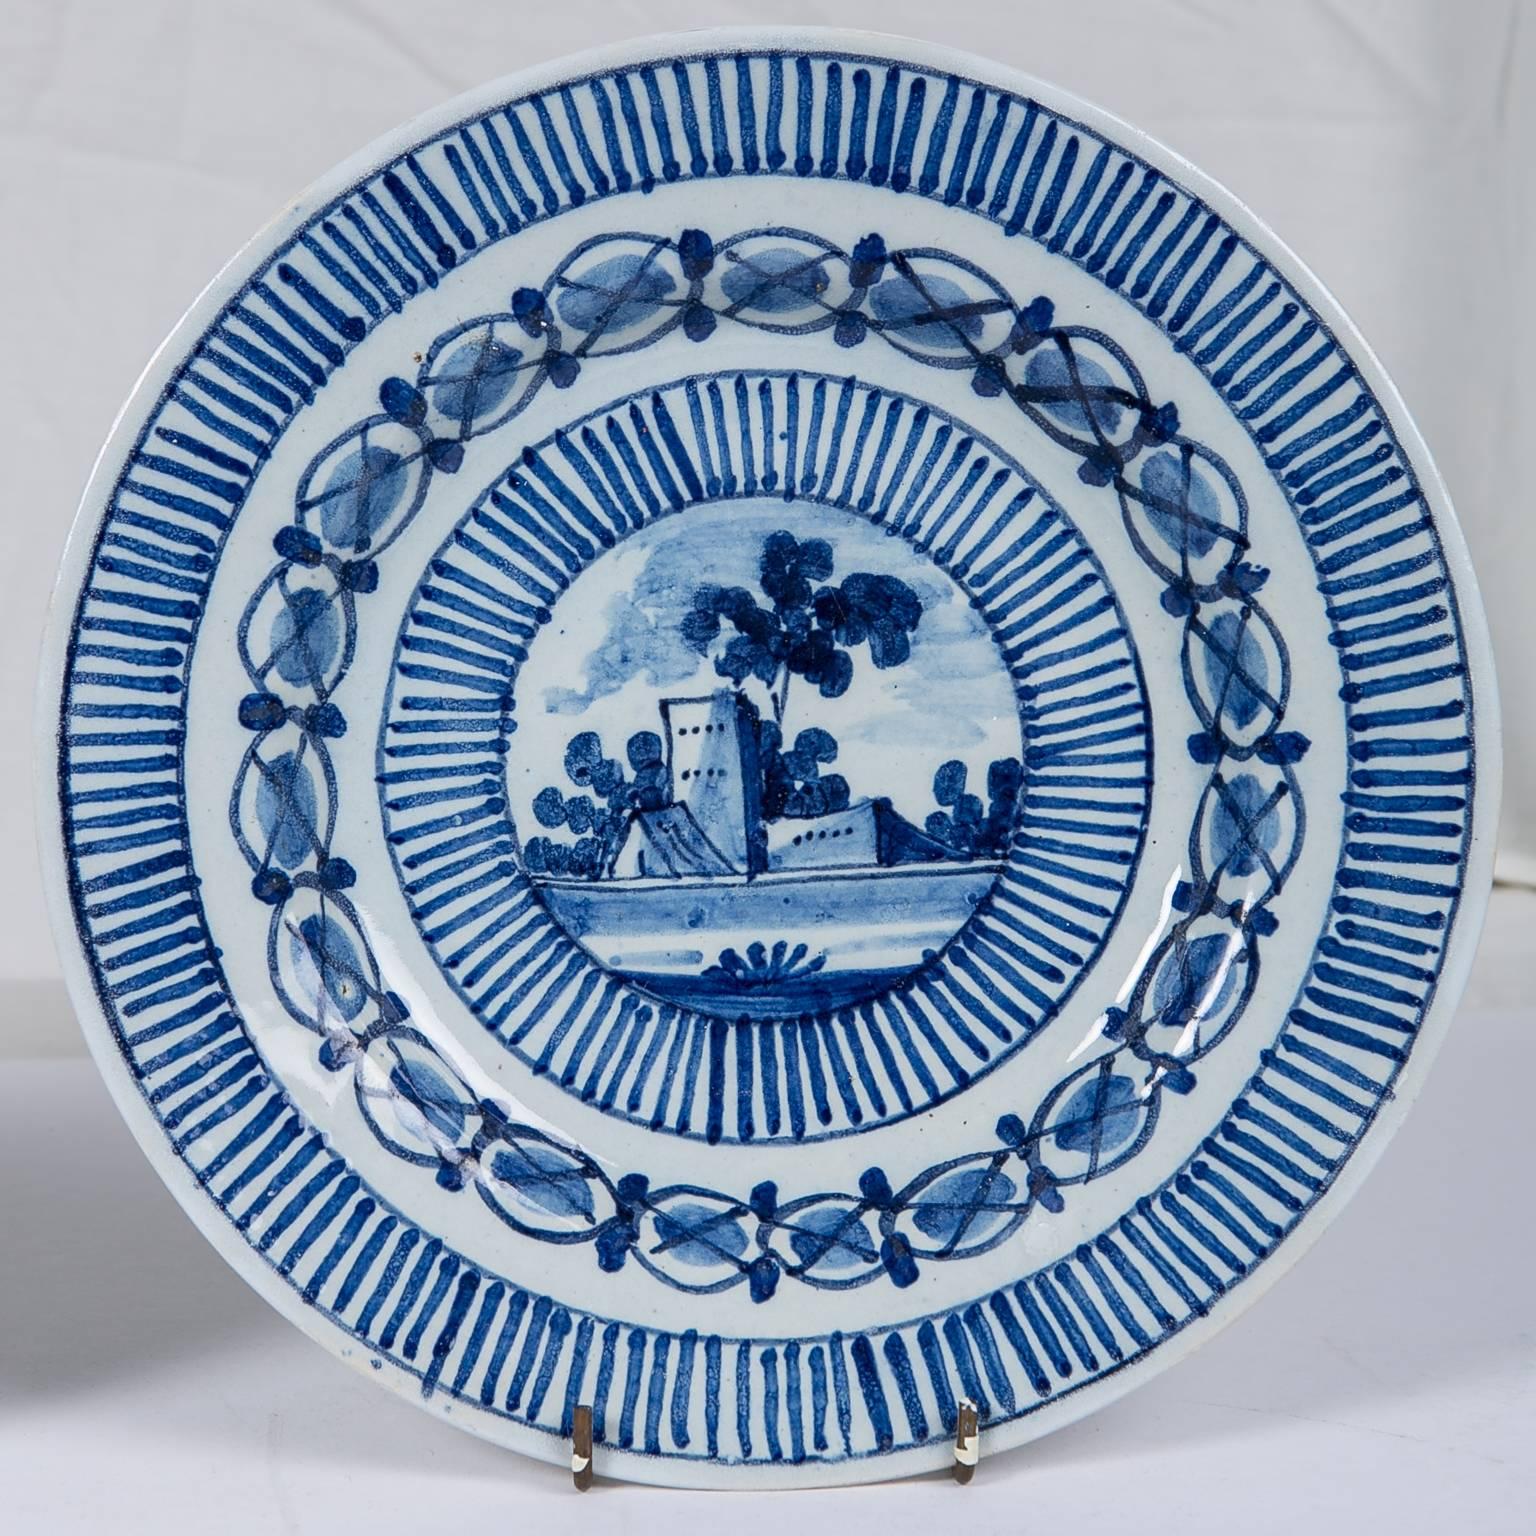 A picturesque castle scene is the focal point of this pair of Dutch Delft Blue and White plates.
The radiating lines framing the castle are repeated along the edge of the plate creating a very striking effect.
This pair is a wonderful representation